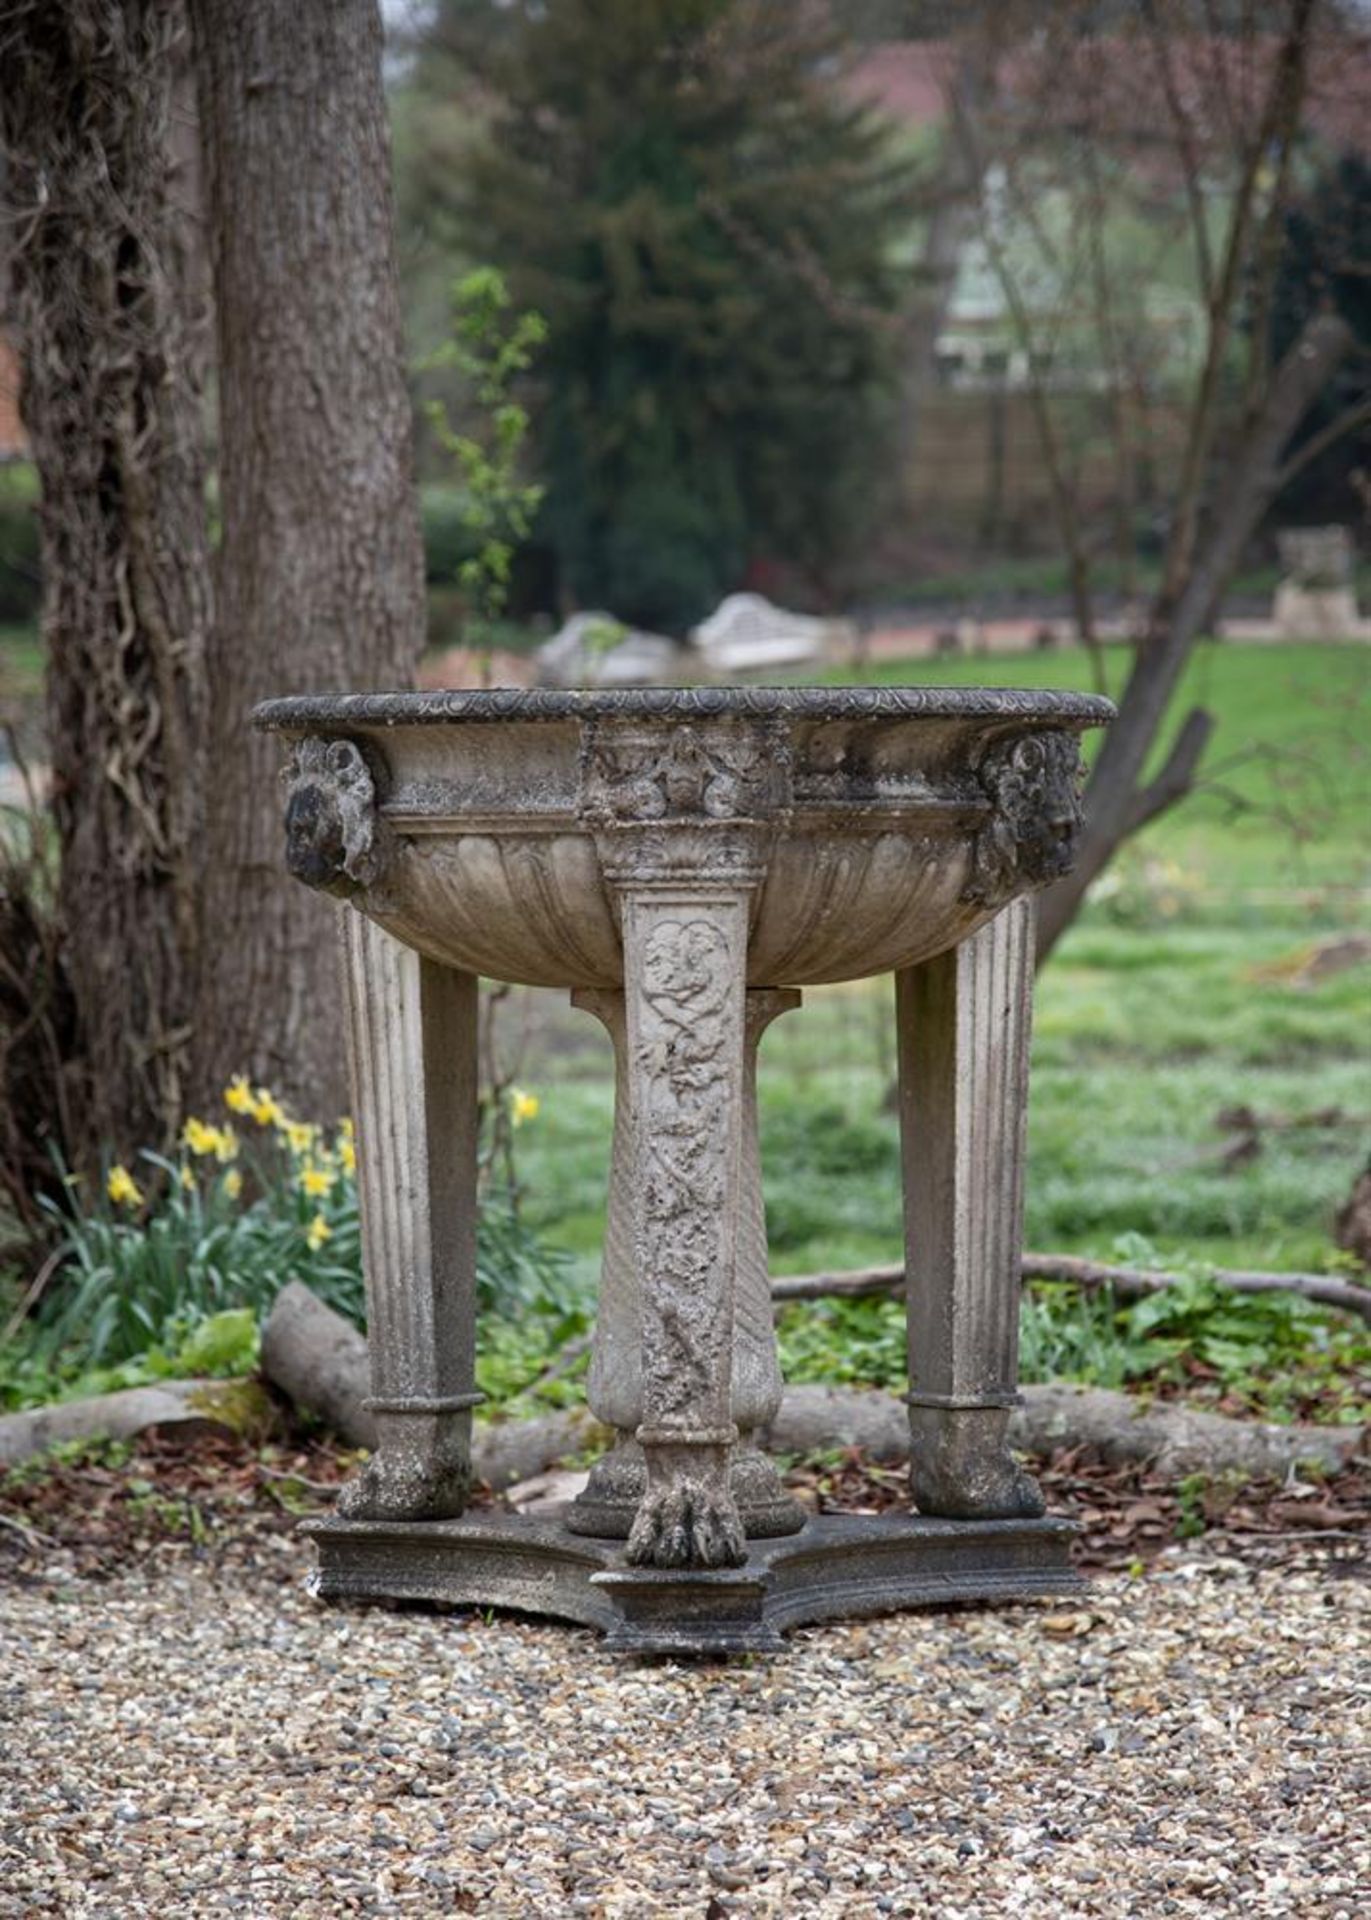 AFTER THE ANTIQUE, A LARGE AND IMPRESSIVE ITALIAN WHITE MARBLE FOUNTAIN, 19TH CENTURY